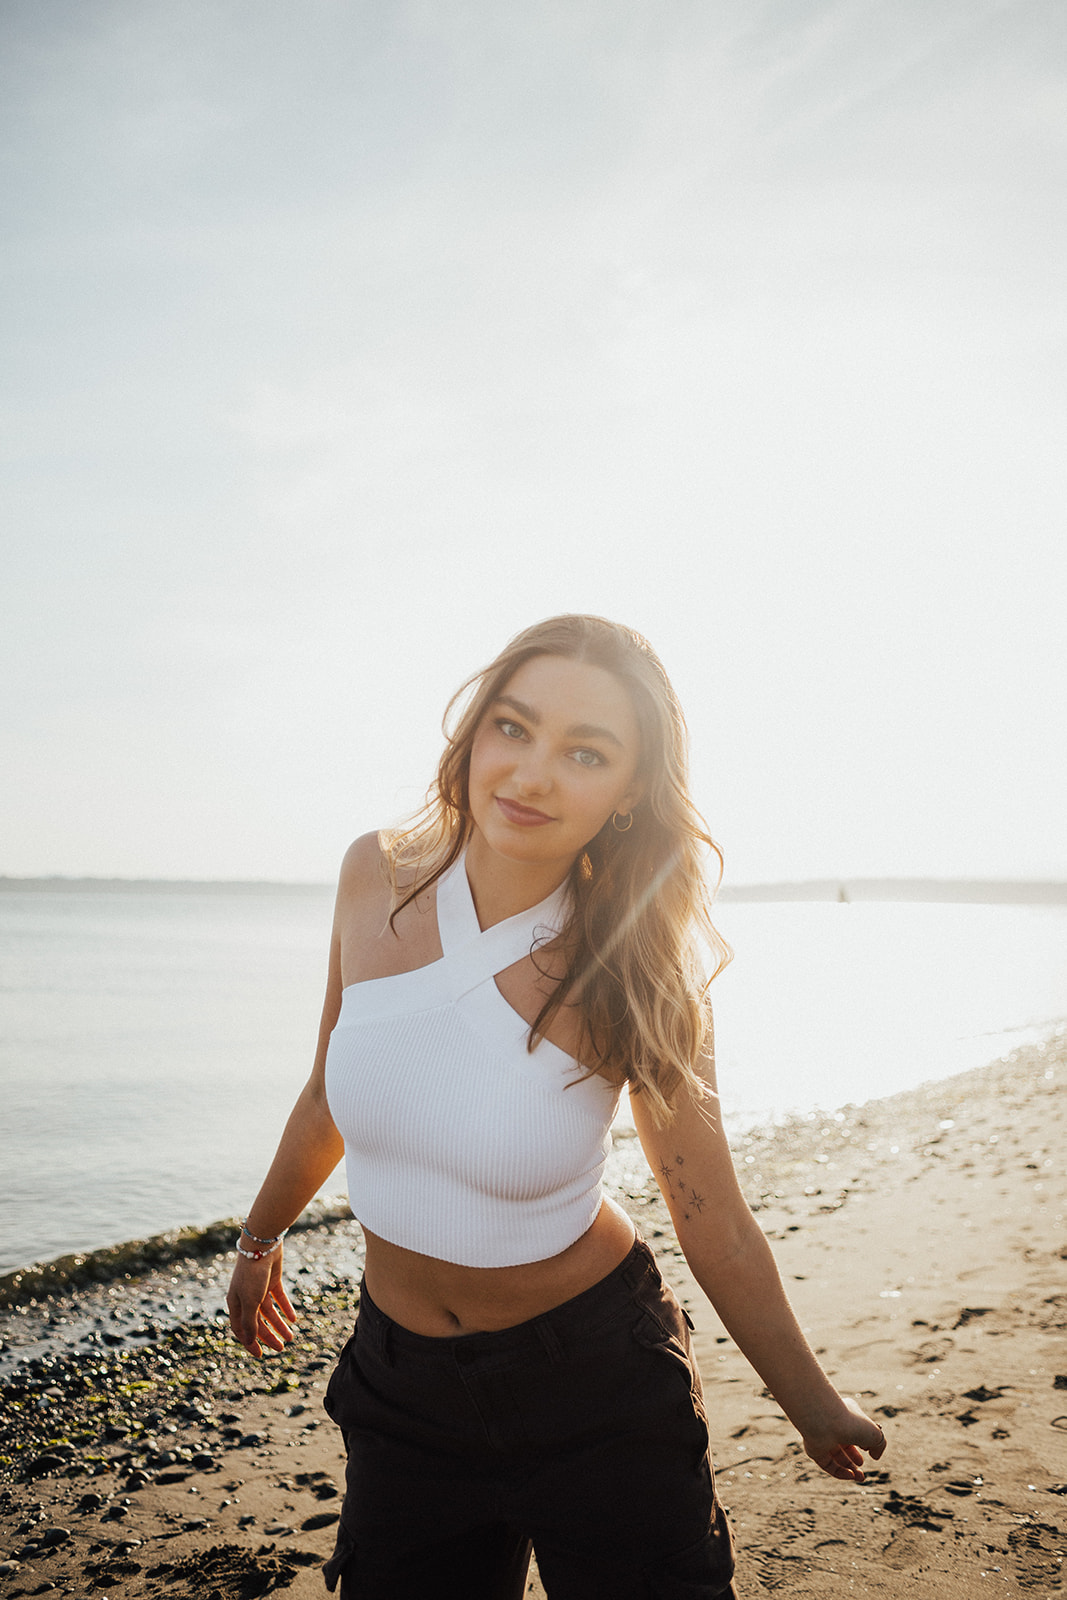 Seattle senior photo session at Discovery Park, golden hour by Hallie Kathryn Photography. Warm, authentic, and natural